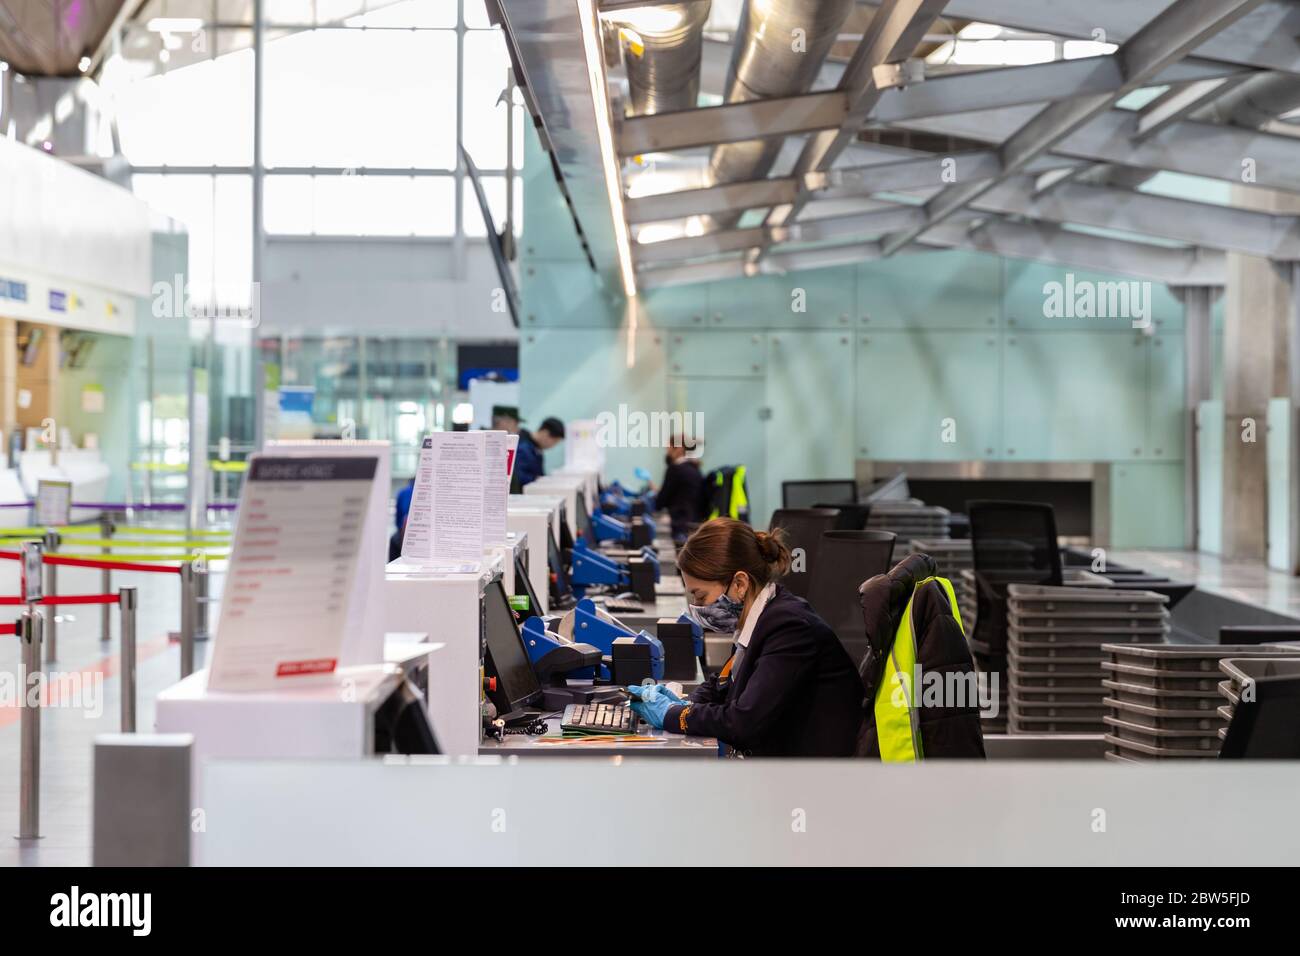 St. Petersburg, Russia – May 8, 2020. Registration check-in counters at almost empty Pulkovo airport due to coronavirus pandemic.Bored staff woman in Stock Photo